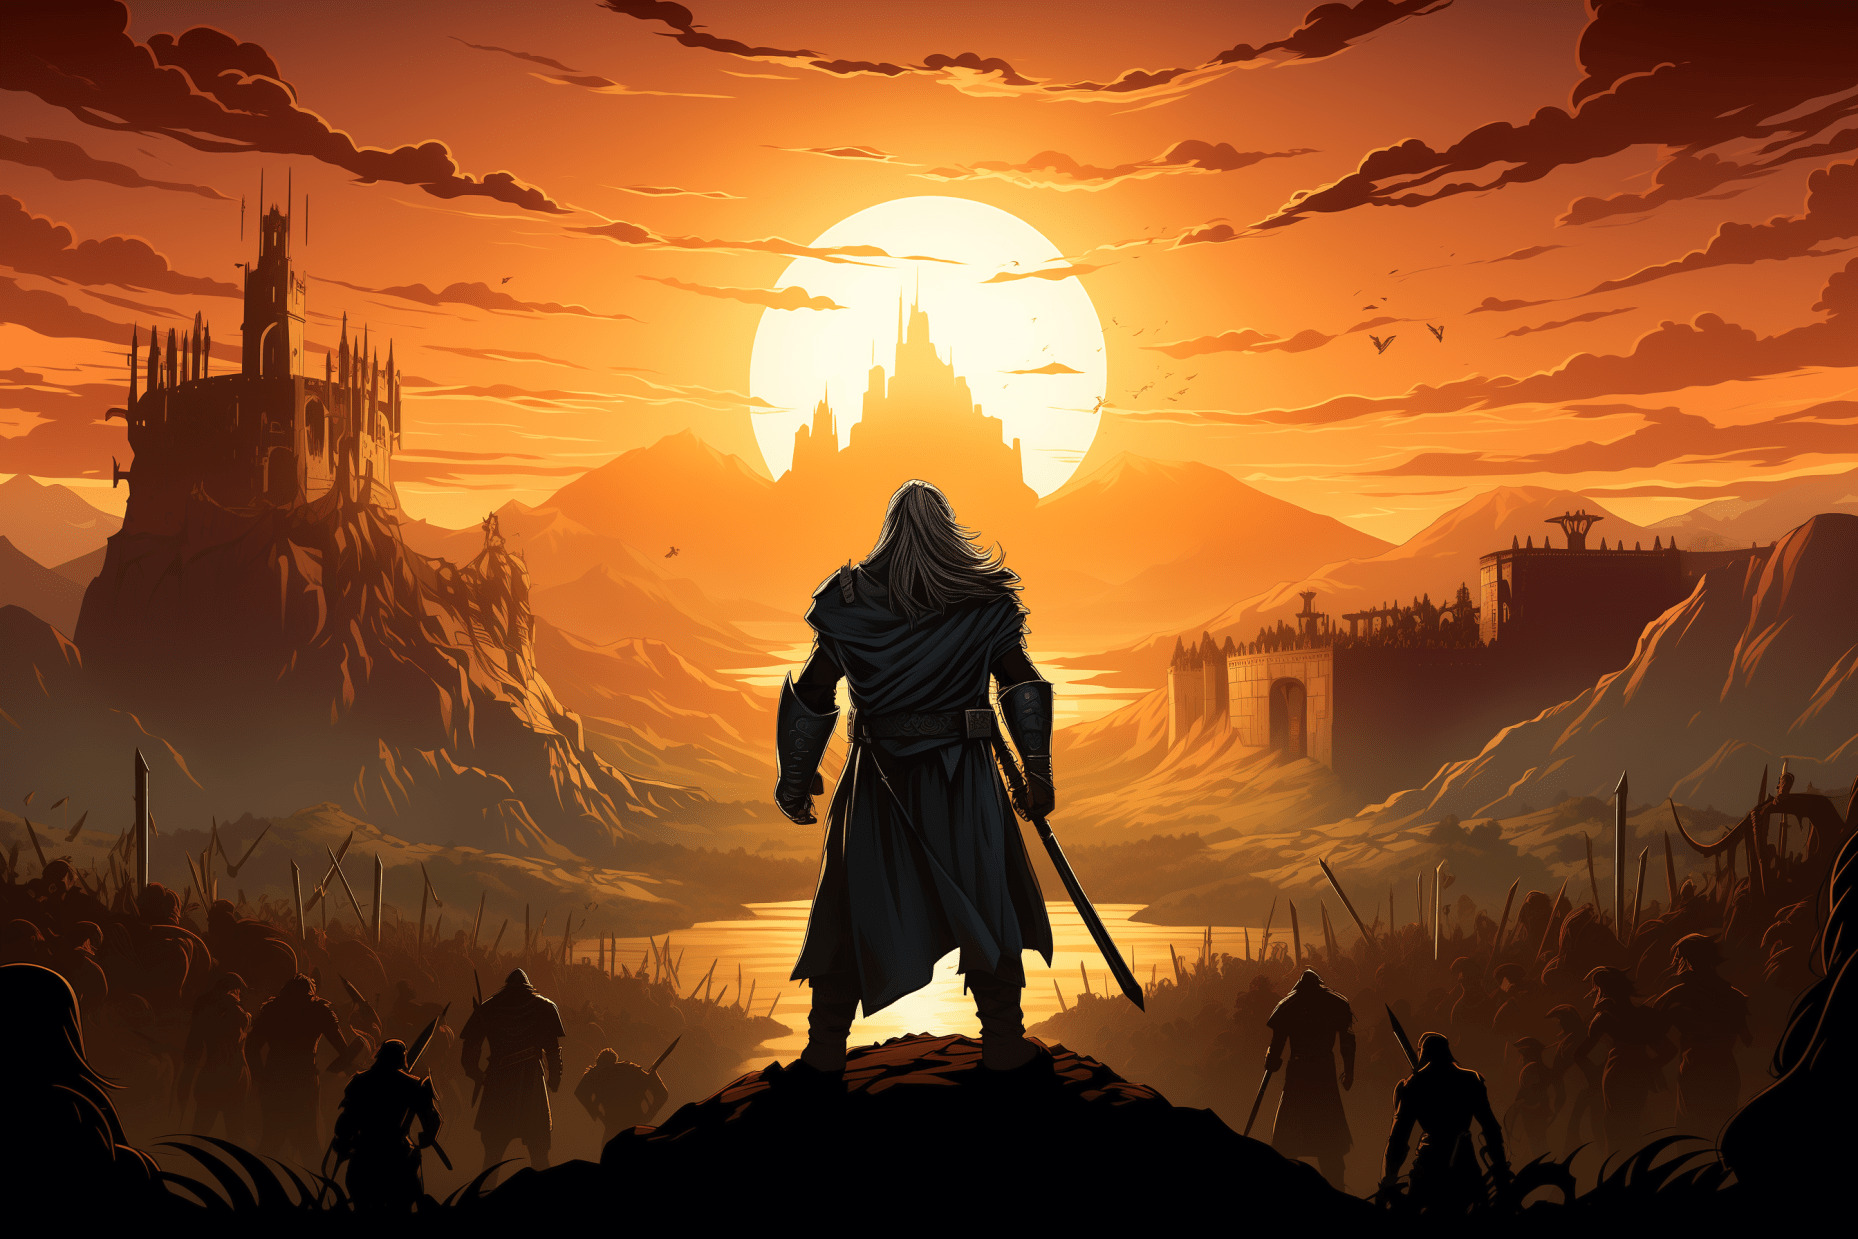 Fanart depiction of Middle Earth: Shadow of Mordor